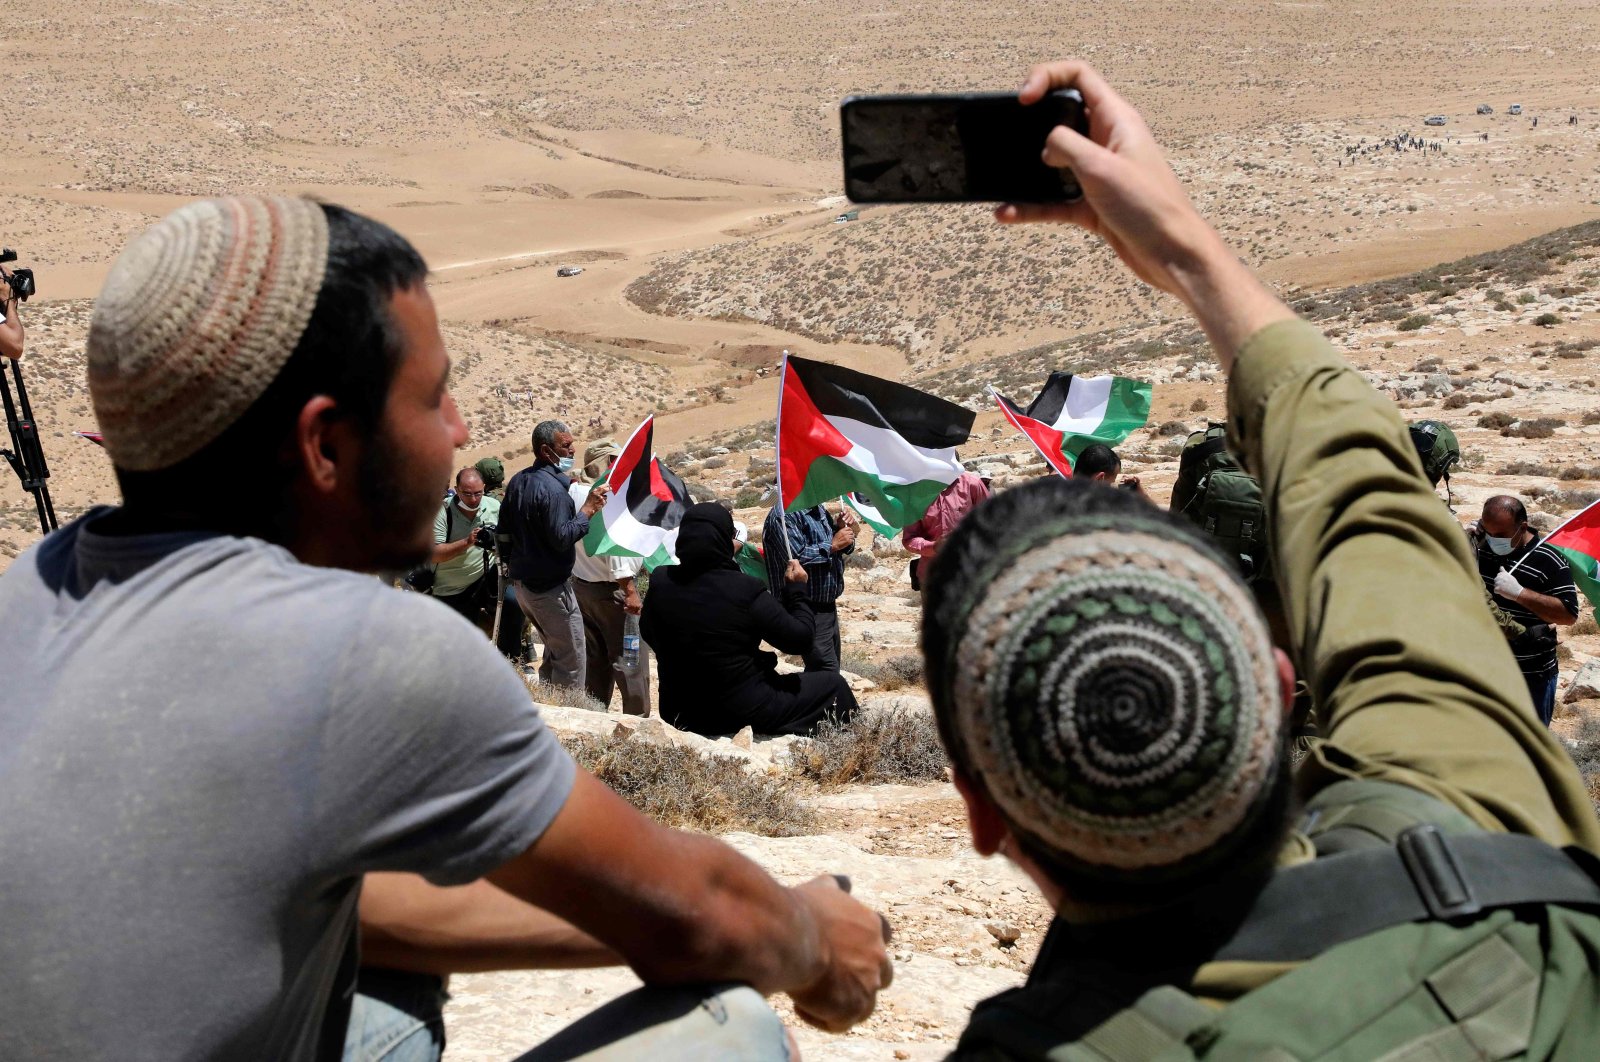 An Israeli soldier takes a selfie of himself with a Jewish settler, as Palestinian landowners and demonstrators protest Israeli settlement building activities on their land in al-Thaalaba village, near Yatta, south of Hebron city in the occupied West Bank, Aug. 21, 2020. (AFP Photo)